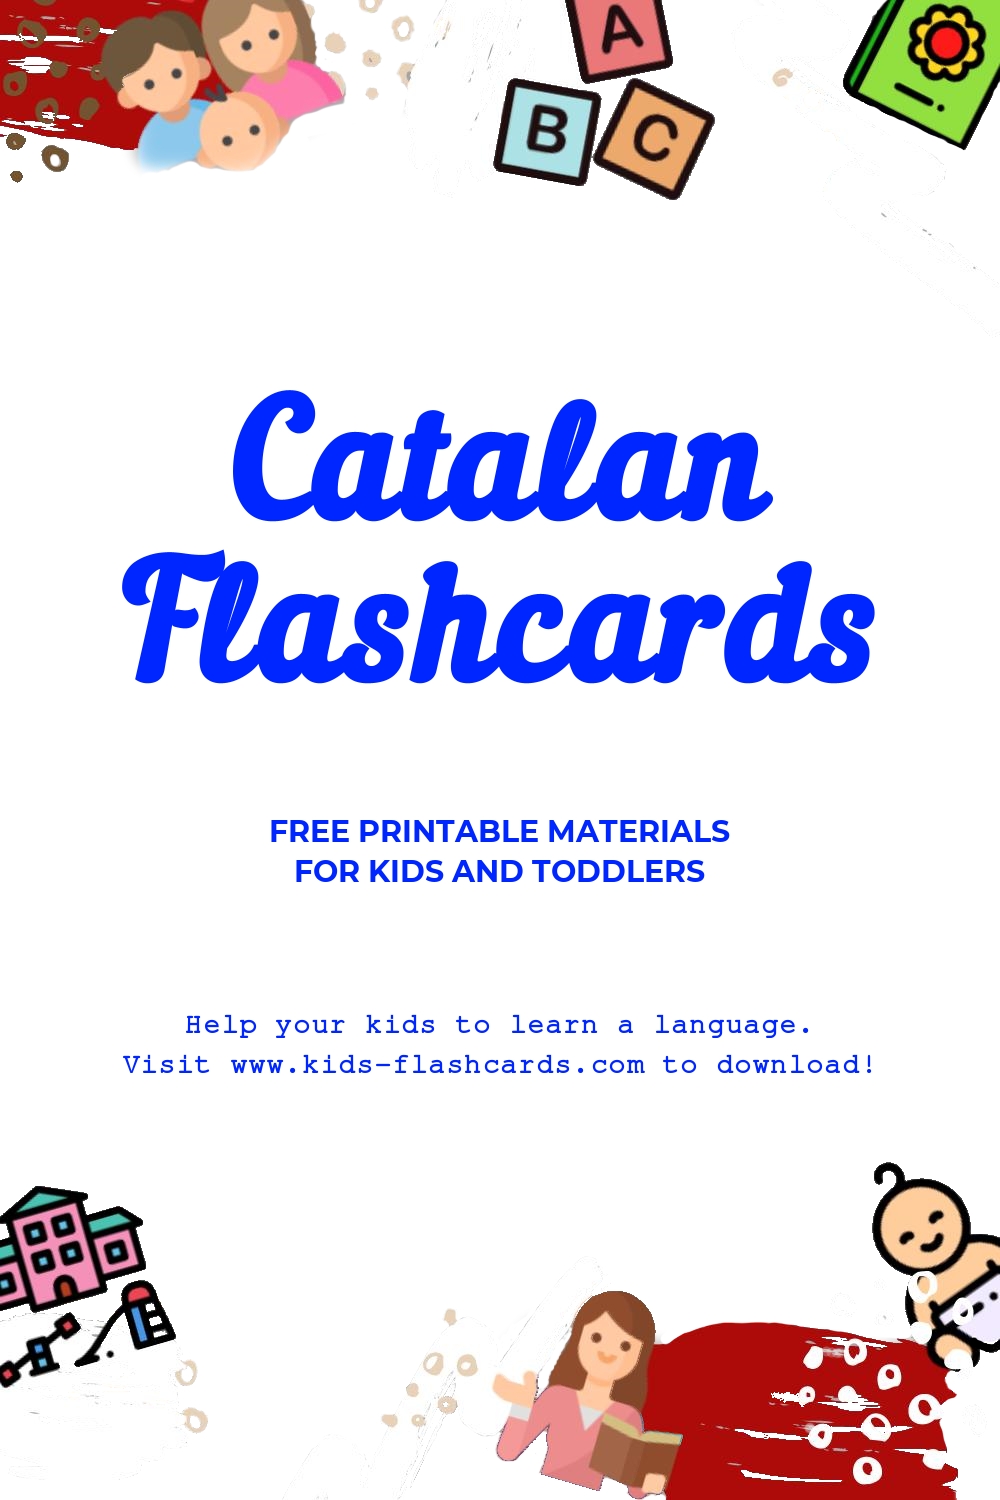 Worksheets to learn Catalan language